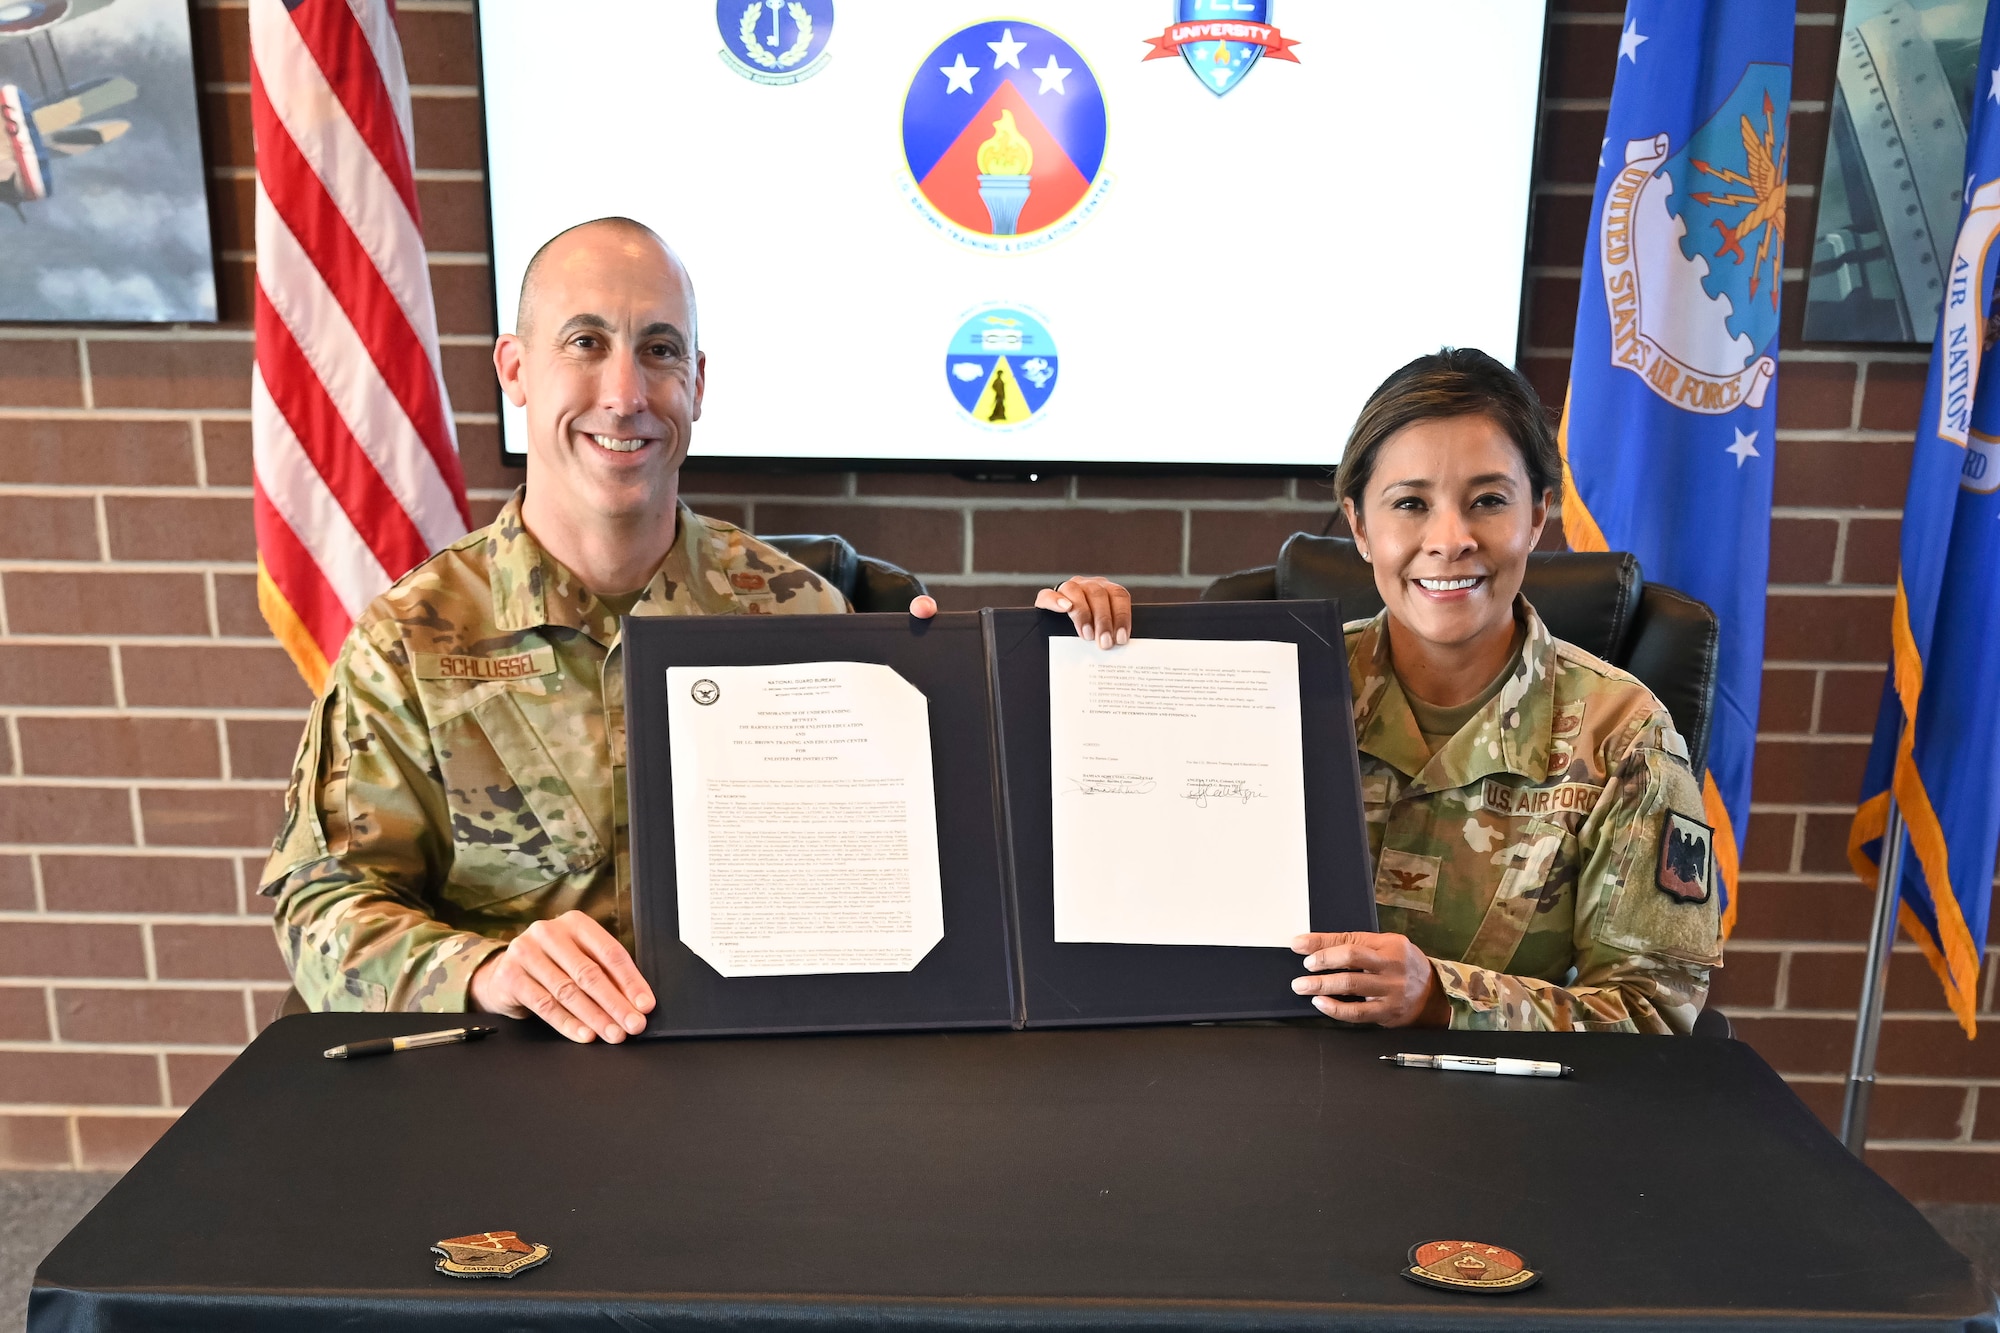 U.S. Air Force Col. Angela Tapia, commander, I.G. Brown Training and Education Center (TEC), and U.S. Air Force Col. Damian Schlussel, commander, Barnes Center for Enlisted Professional Military Education (EPME), sign a memorandum of understanding (MOU), McGhee Tyson Air National Guard Base, Tennessee, Dec. 14, 2023.  The signing of the MOU solidified the collaborative relationship between the TEC and the Barnes Center for EPME for educating and developing Total Force enlisted leaders. (photo by Master Sgt. Regina Young)